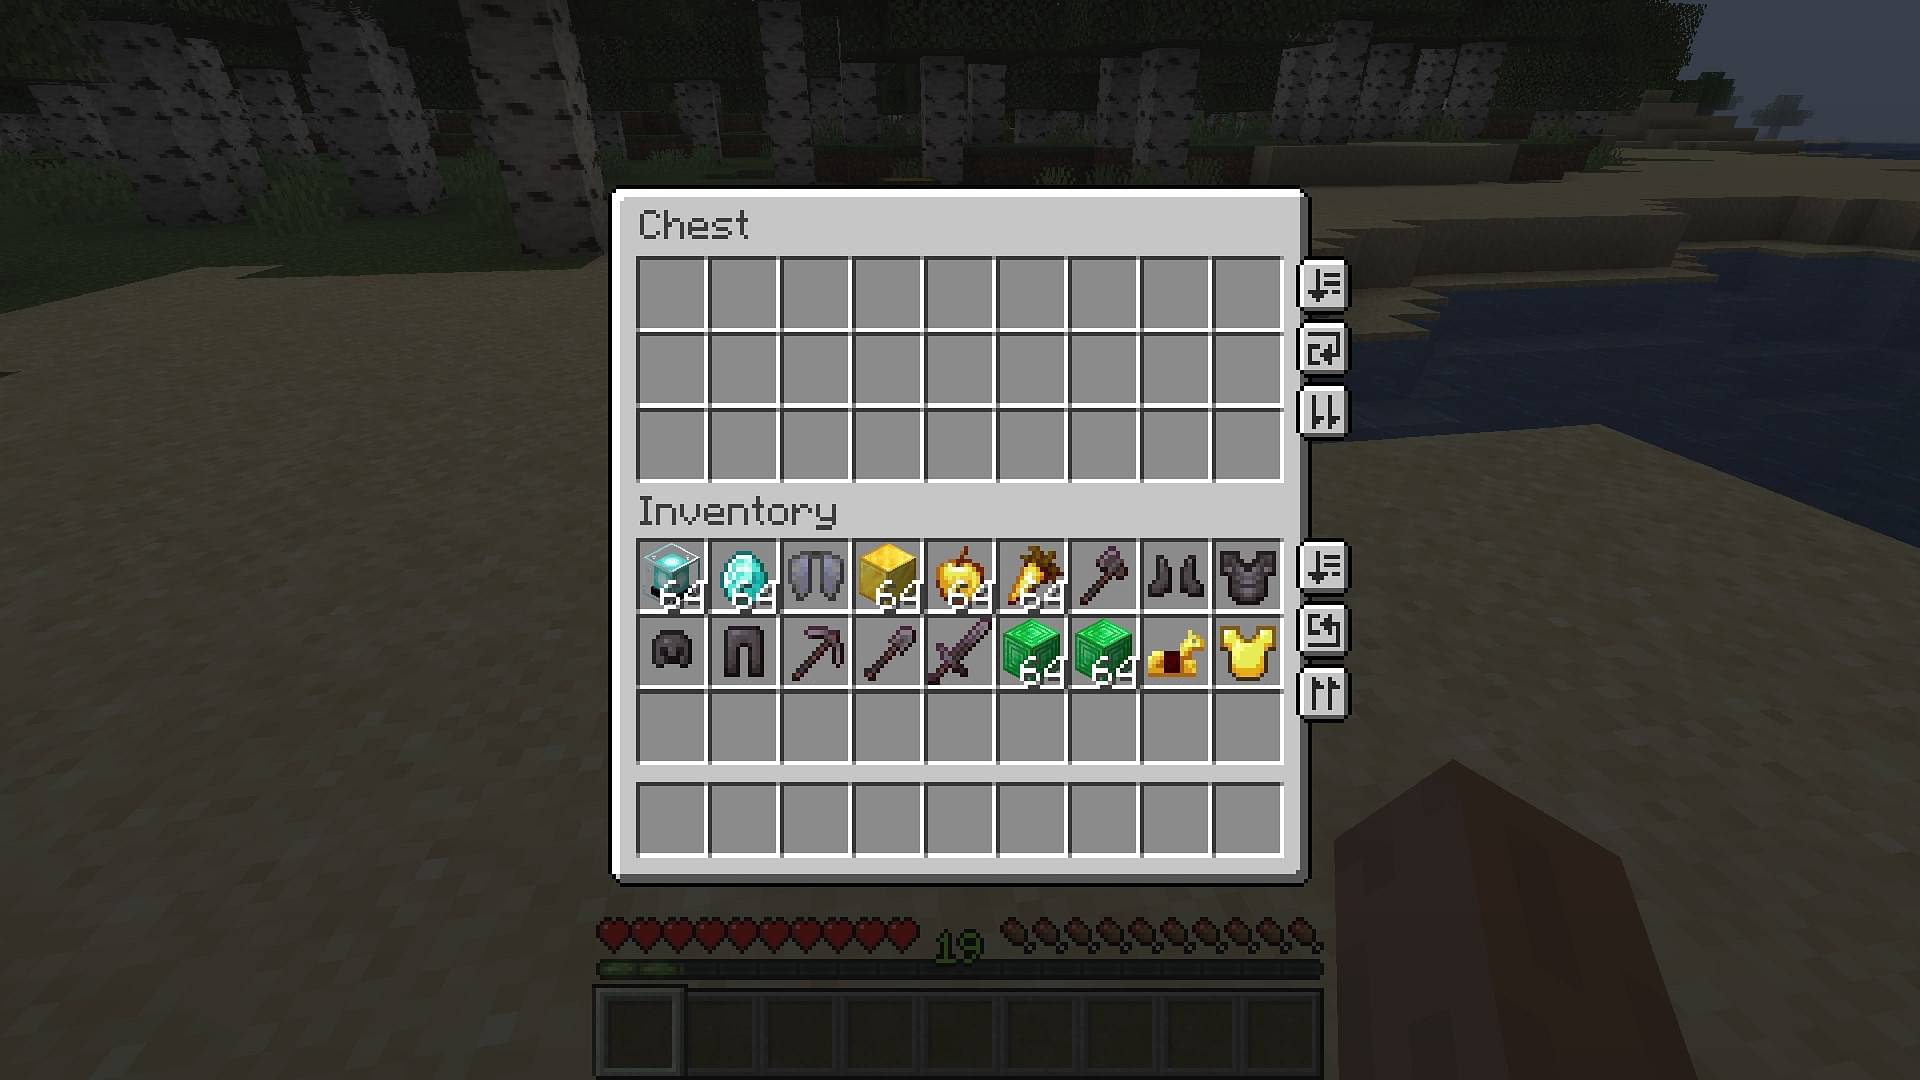 Rarest Items In Minecraft (& How To Get Them)